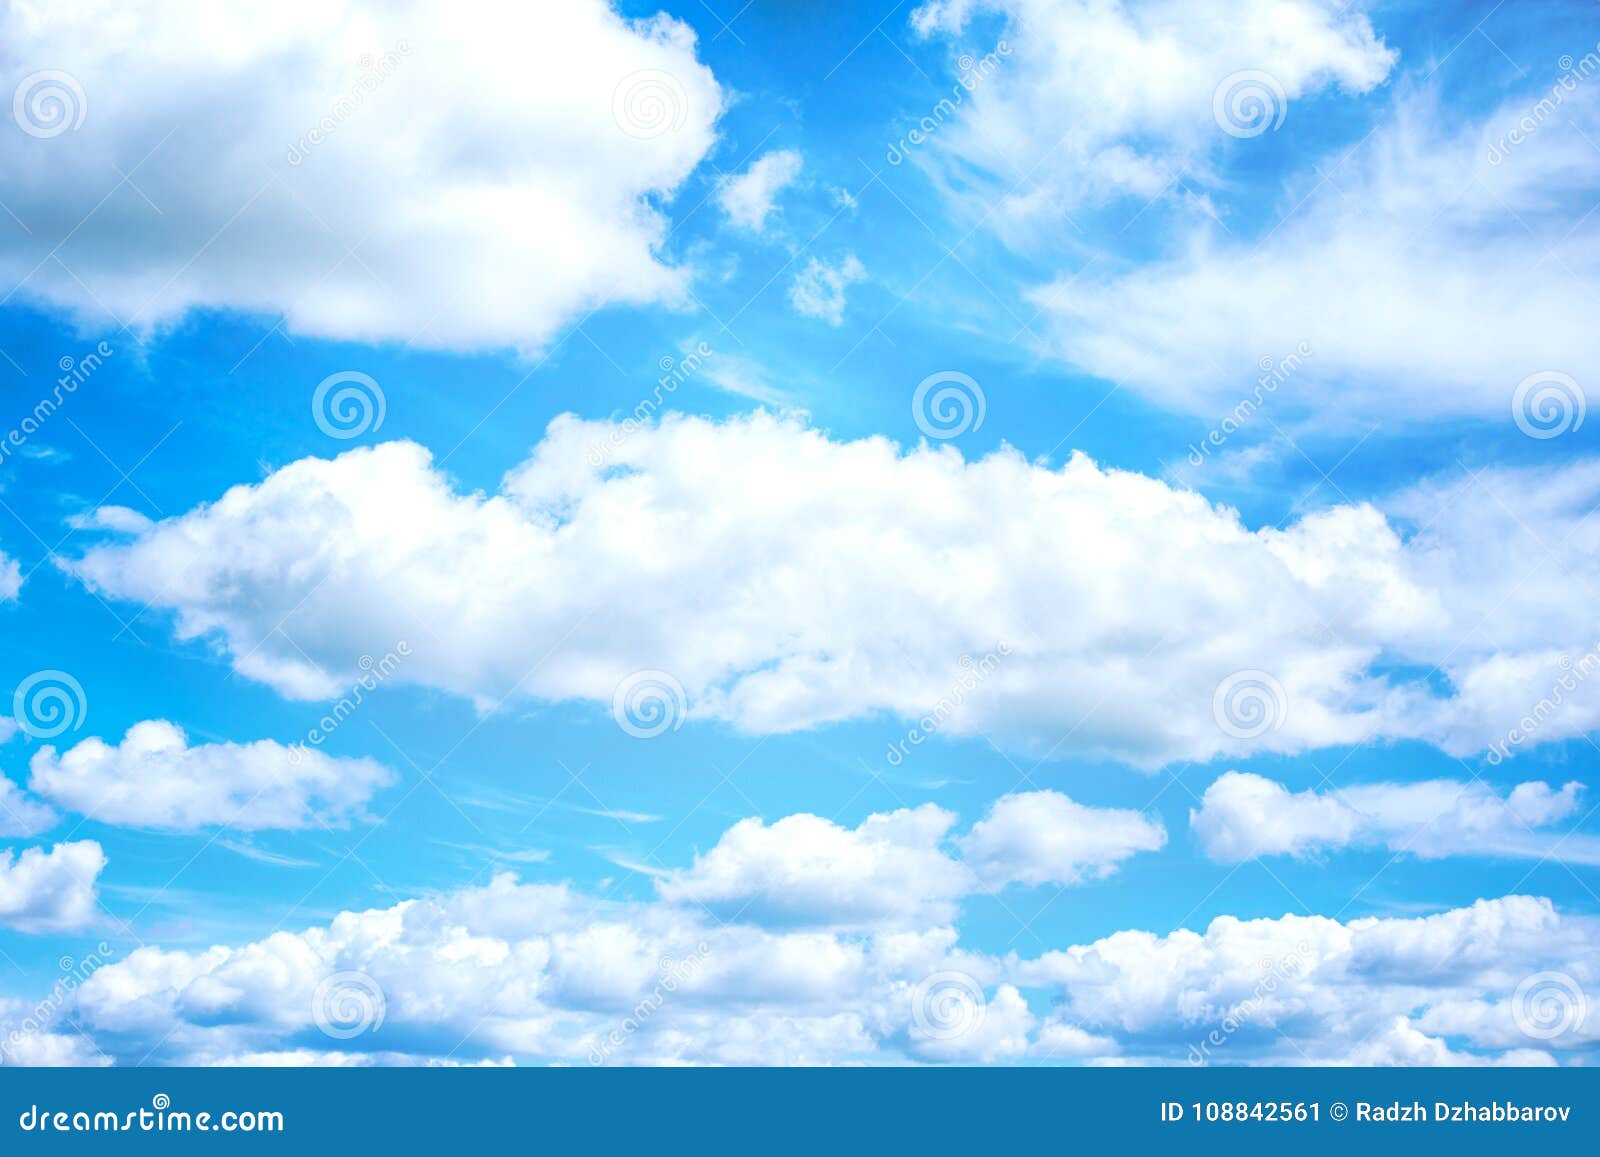 Wallpaper Cloud Daytime Afterglow Cumulus Atmosphere Background   Download Free Image